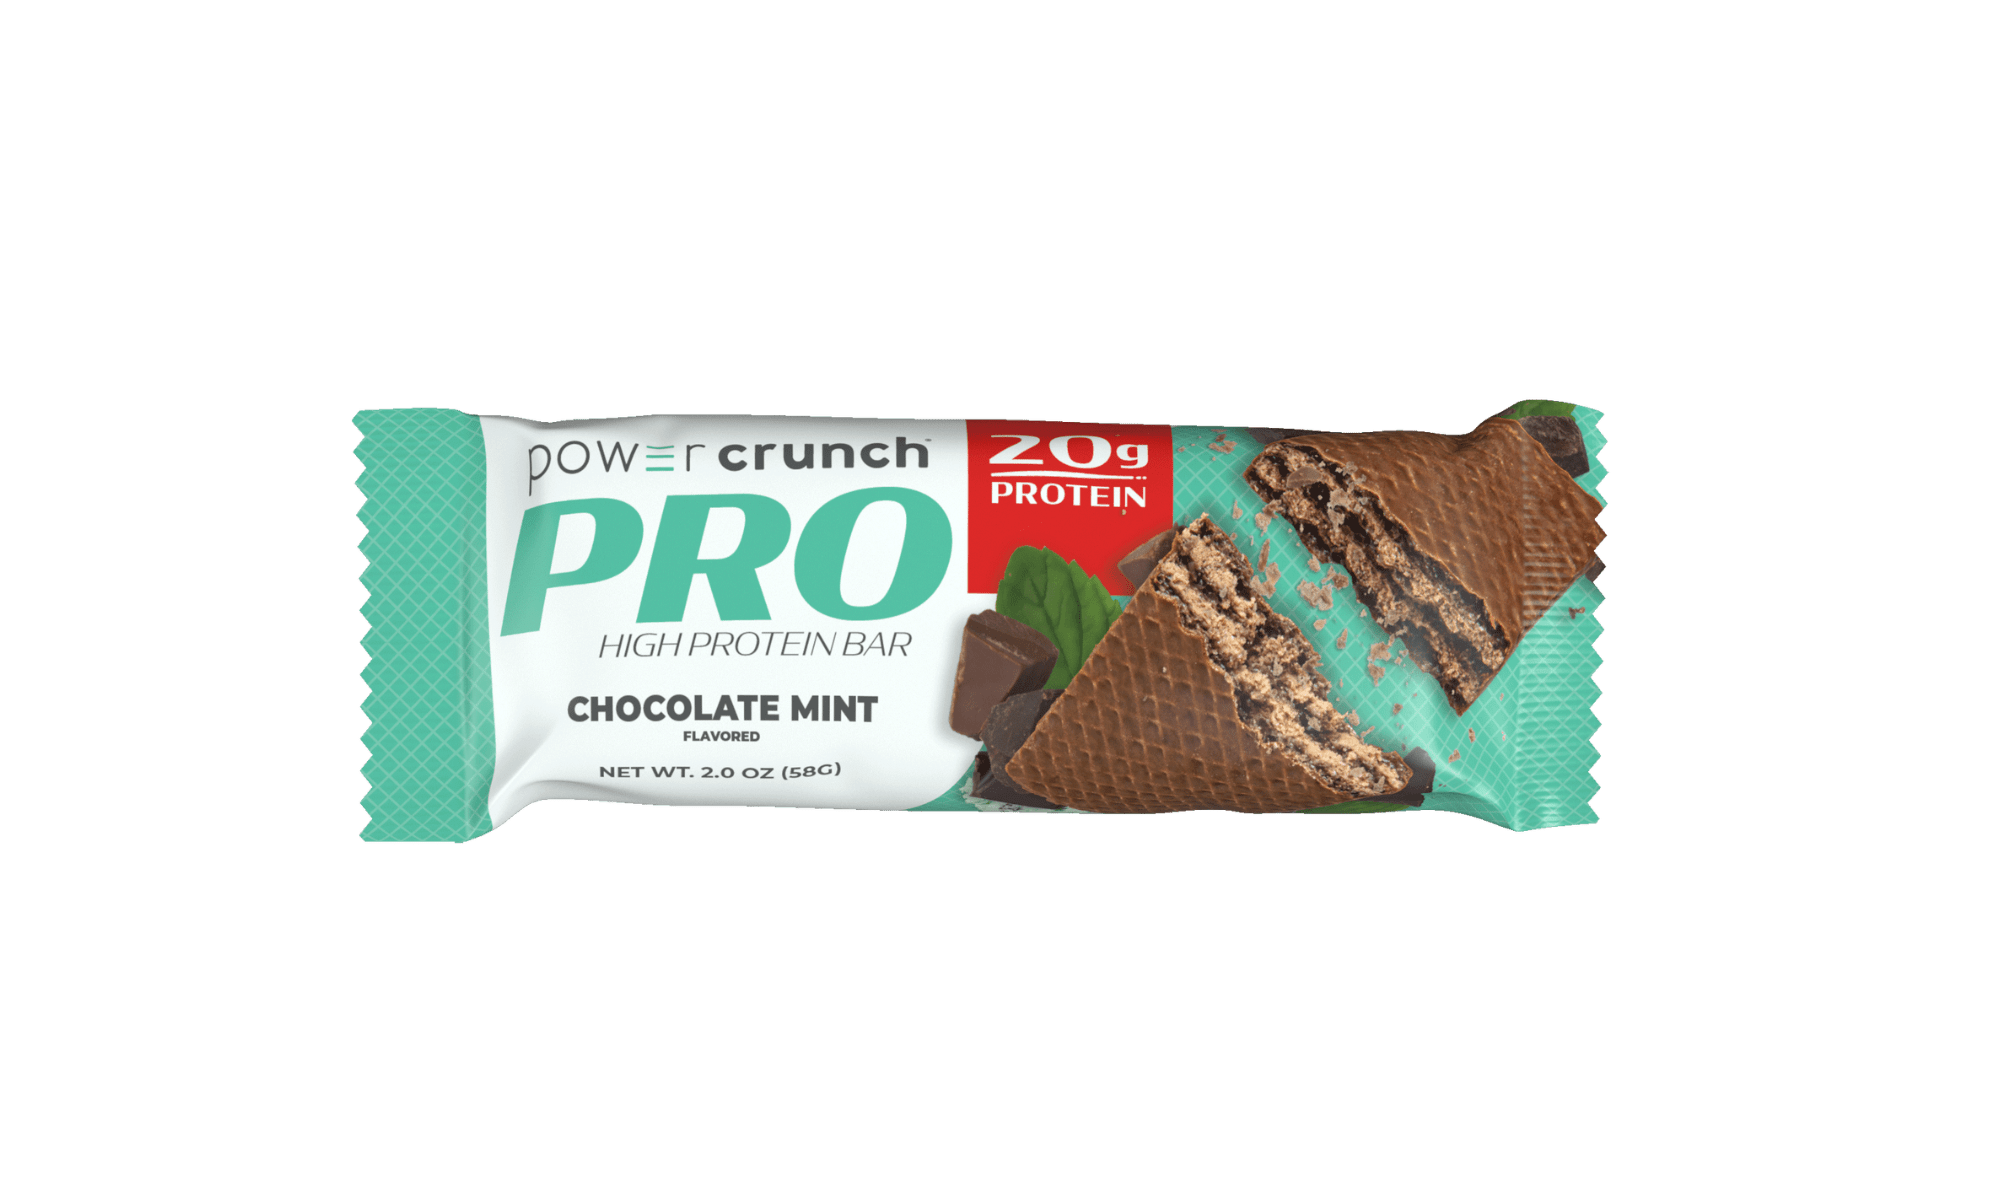 Power Crunch Chocolate Mint PRO 20g protein bars